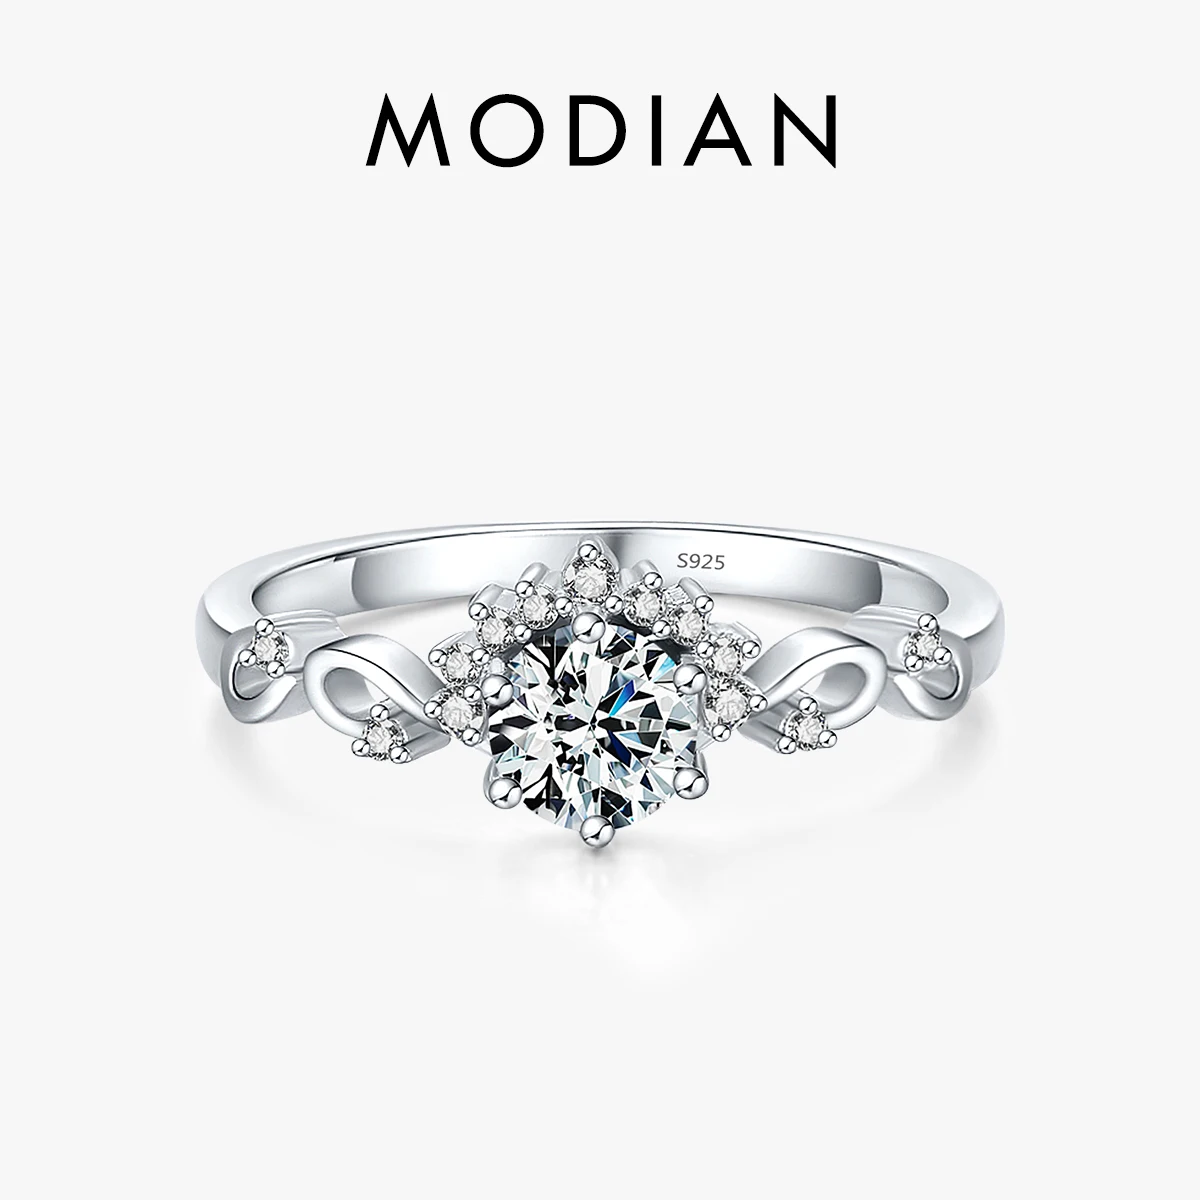 

MODIAN Sparkling Dazzling Wedding Crown Finger Rings For Women Real 925 Sterling Silver Ring Engagement Statement Female Jewelry